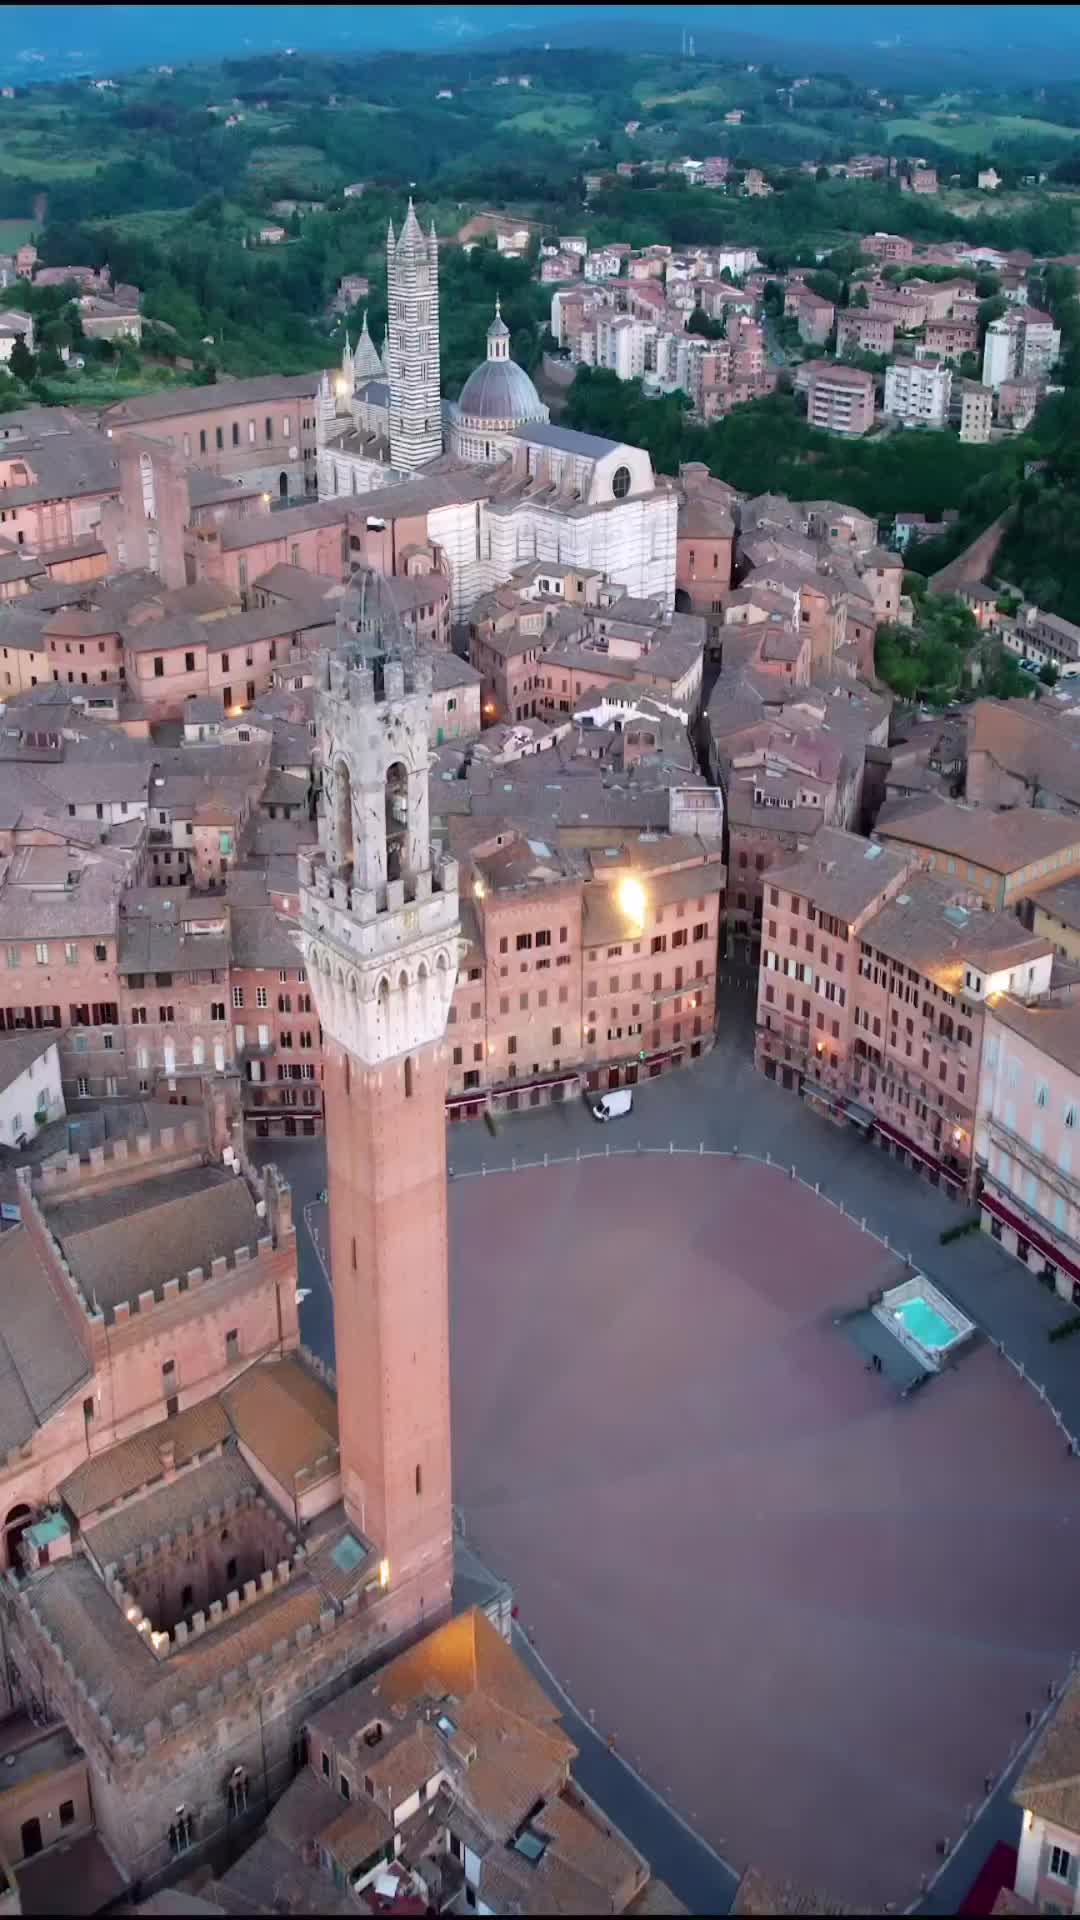 Explore the Rich History of Siena, Italy 🇮🇹